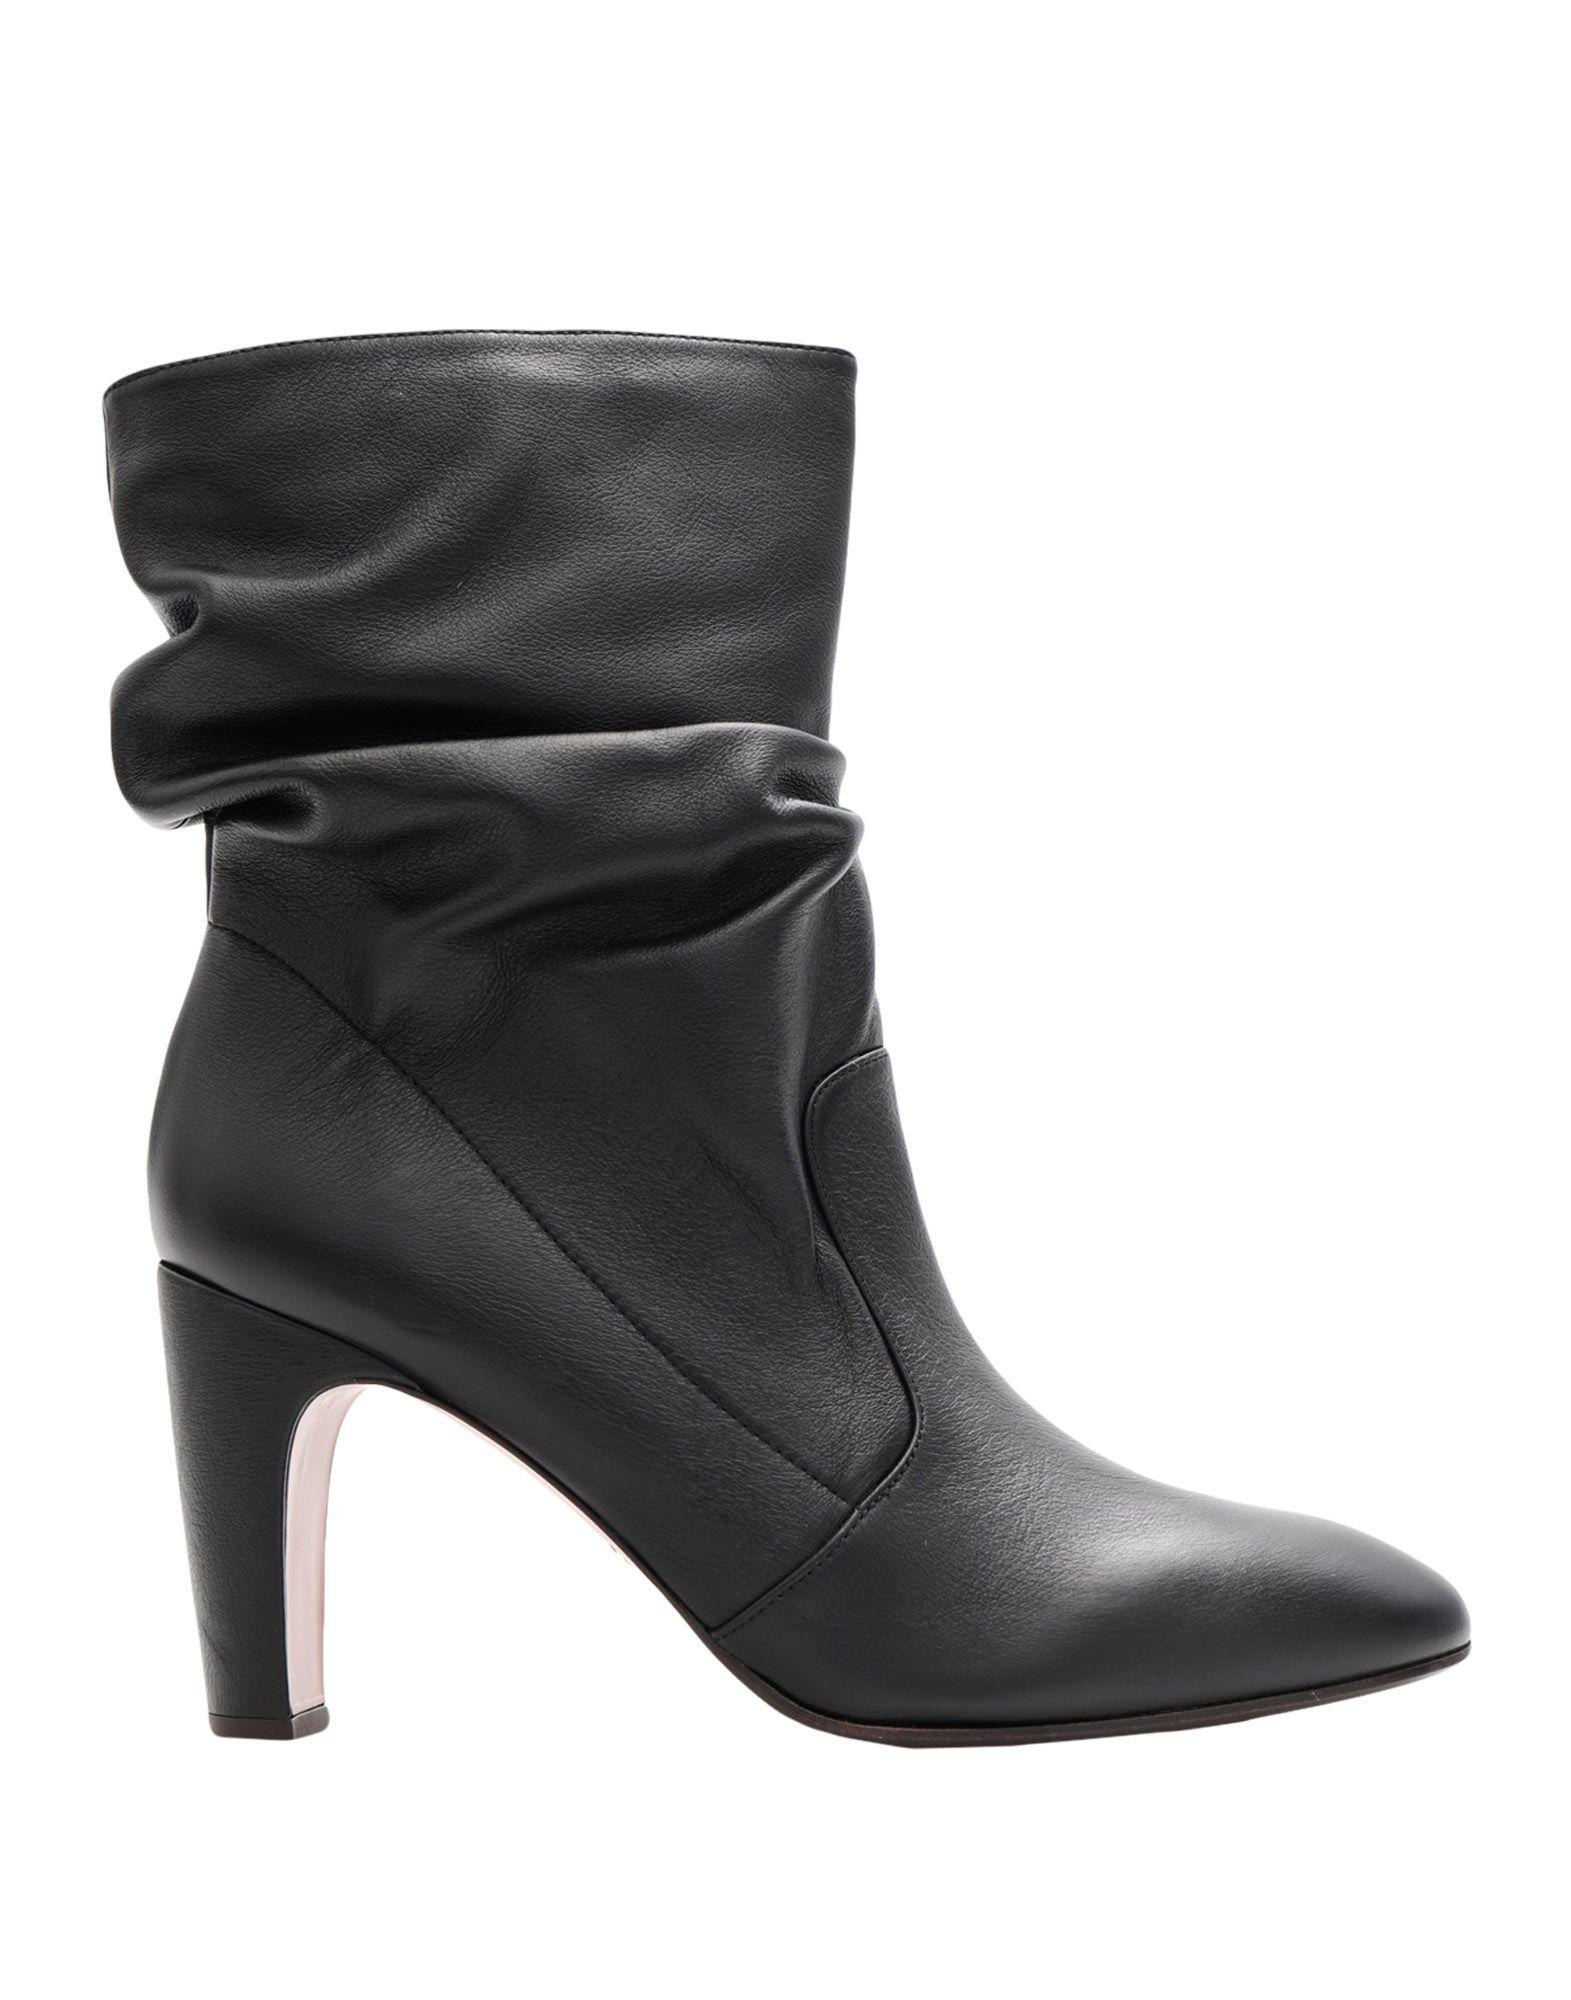 Chie Mihara Leather Ankle Boots in Black - Save 35% - Lyst